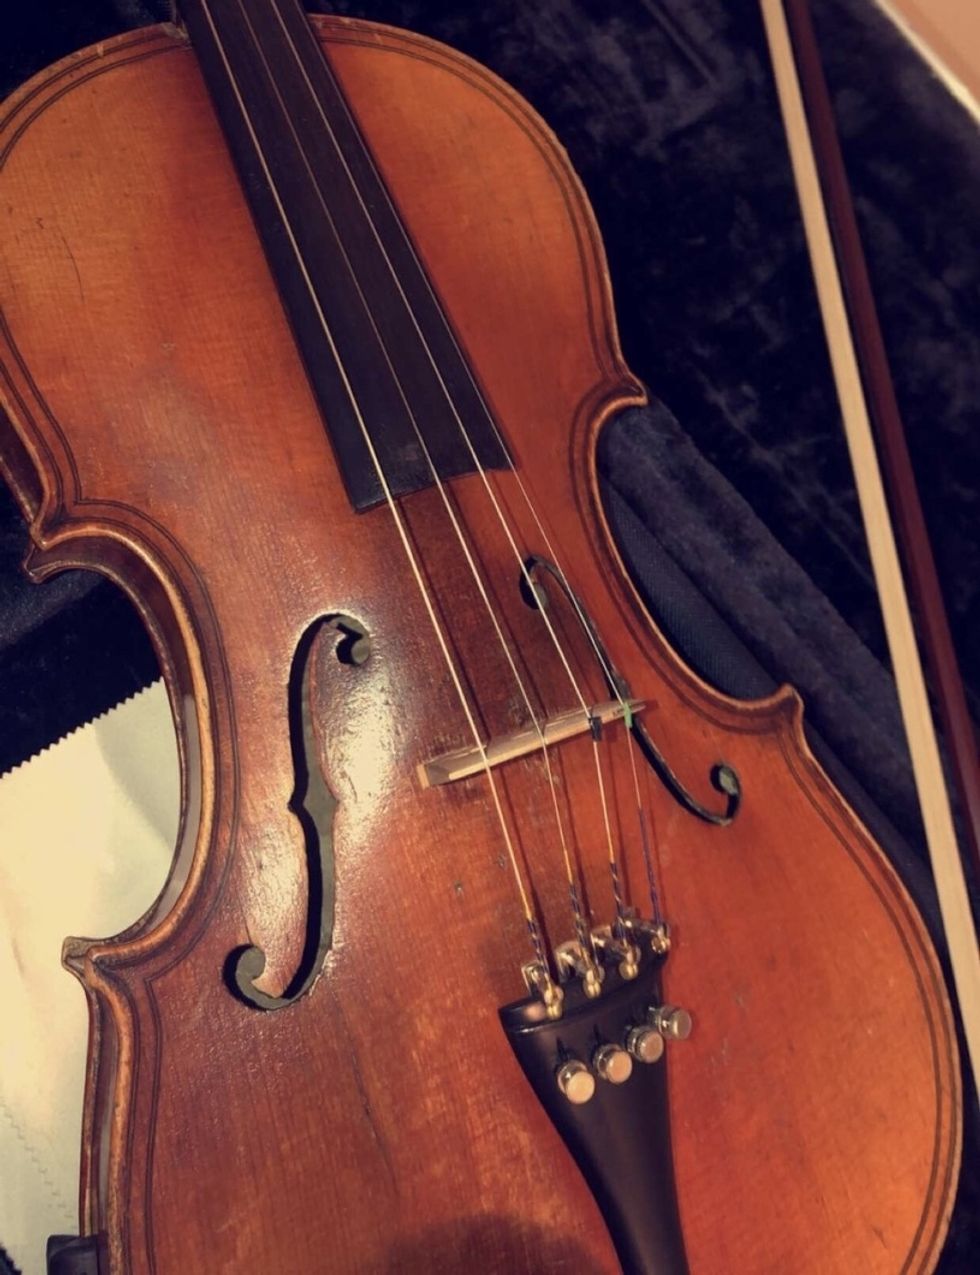 13 Reasons That Being An Orchestra Student Was One Of The Best Decisions I Have Ever Made